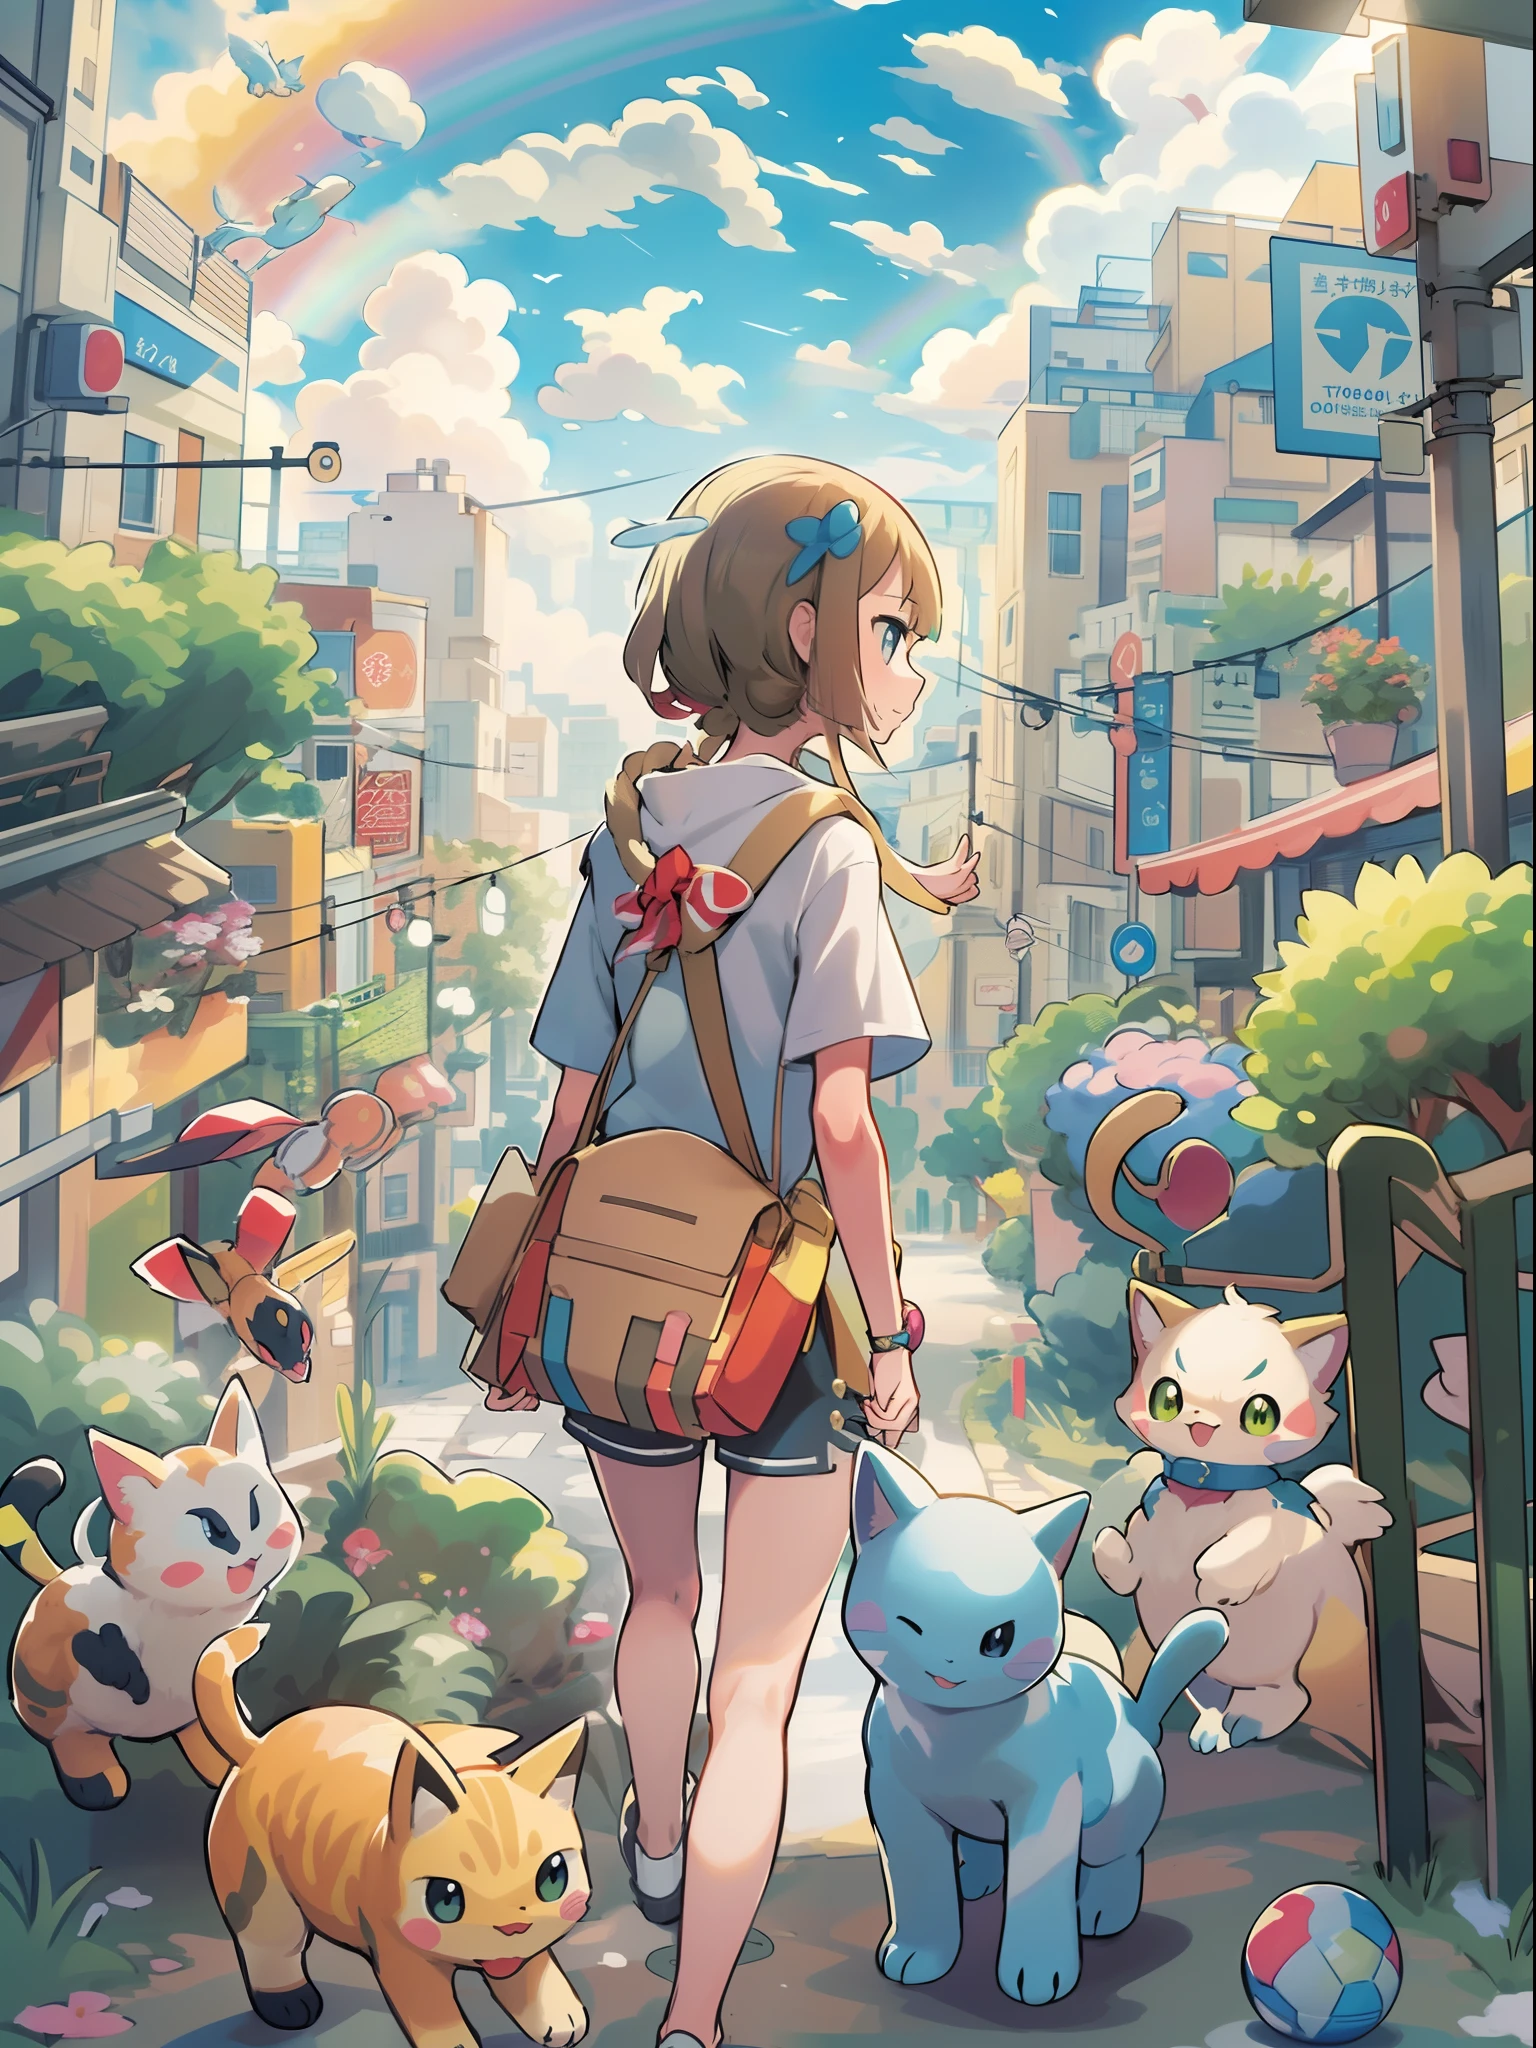 1girl in,A pokémon_The card,(top-quality), (high_quality), (Convoluted_Details), (ultra-detailliert), (illustratio), (Distinct_image),saito_naoki,city scenery、Rainbow view、With cats（（Cute cat１.５））